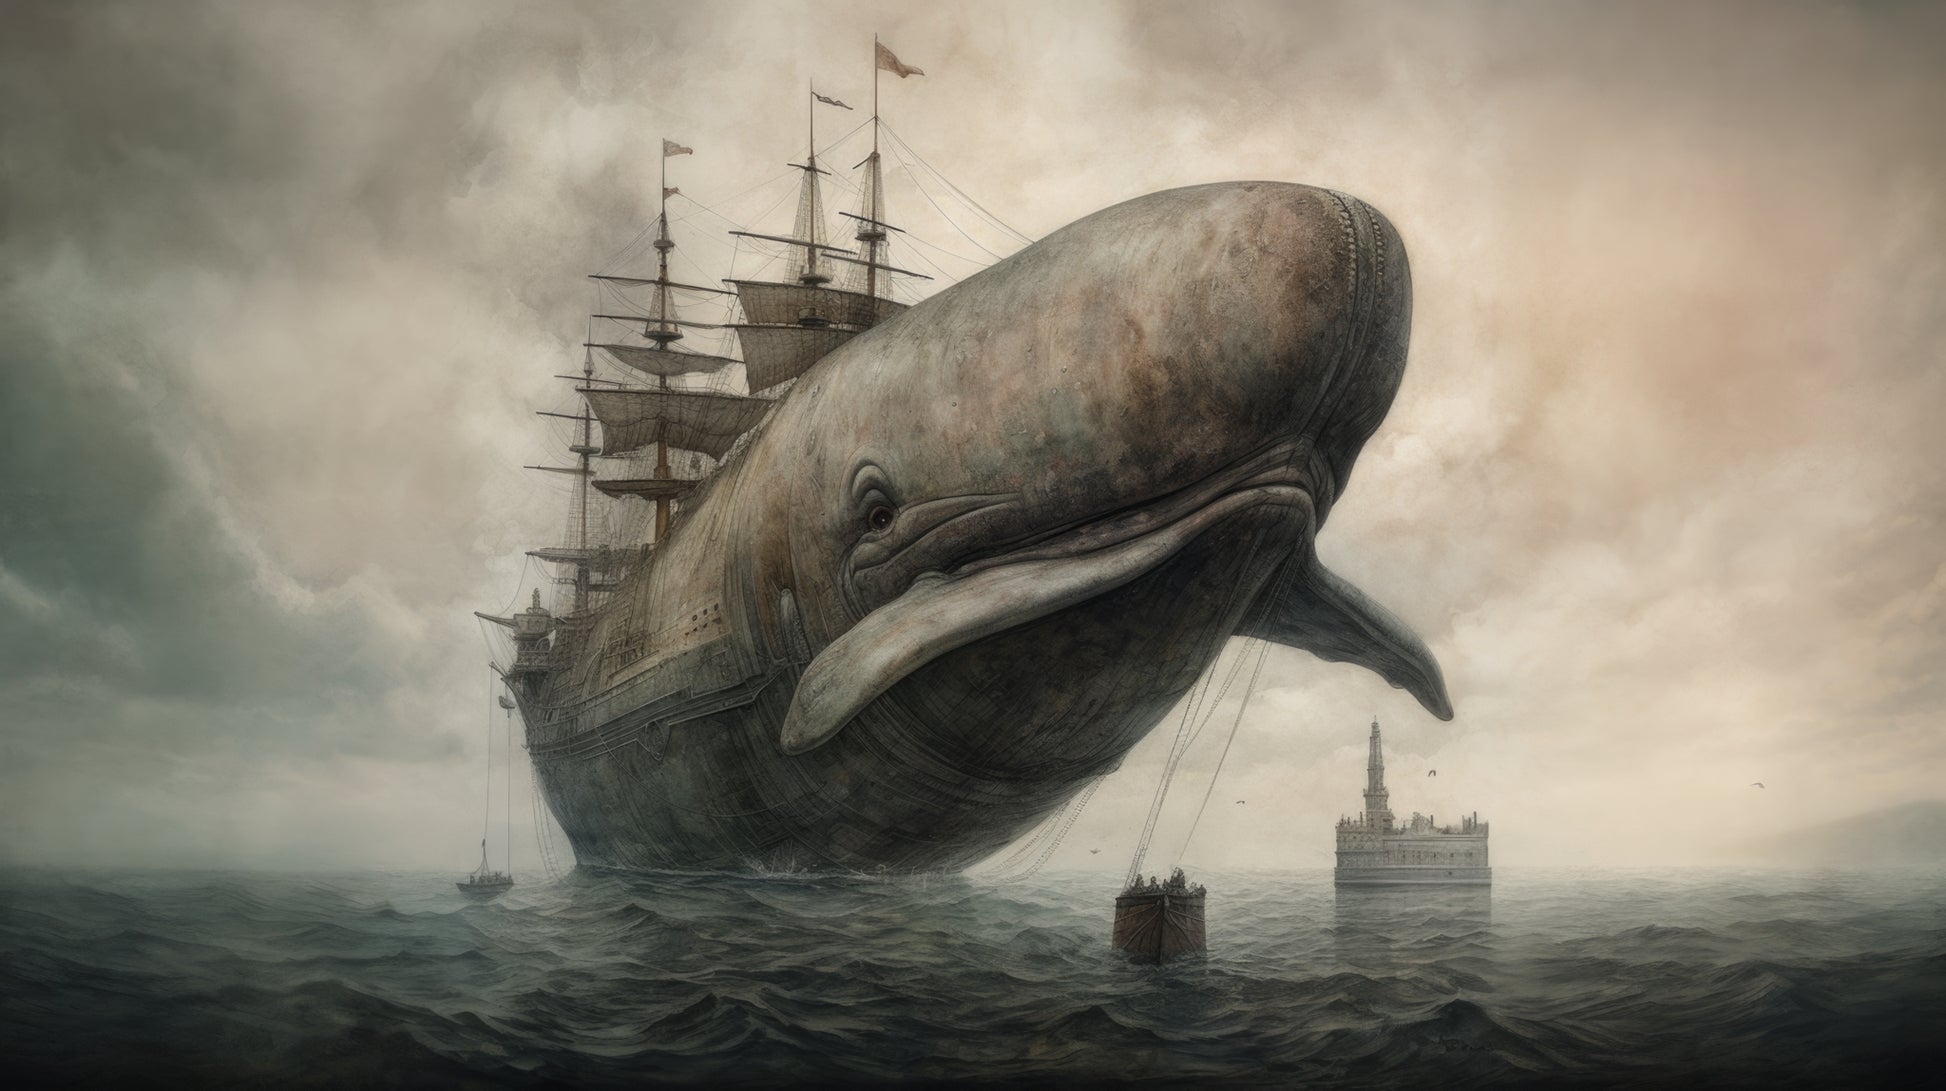 Fine art print featuring a surreal scene of a colossal whale carrying a ship on its back, set against a stormy sea and cloudy sky. This art print is a stunning example of an artwork print.